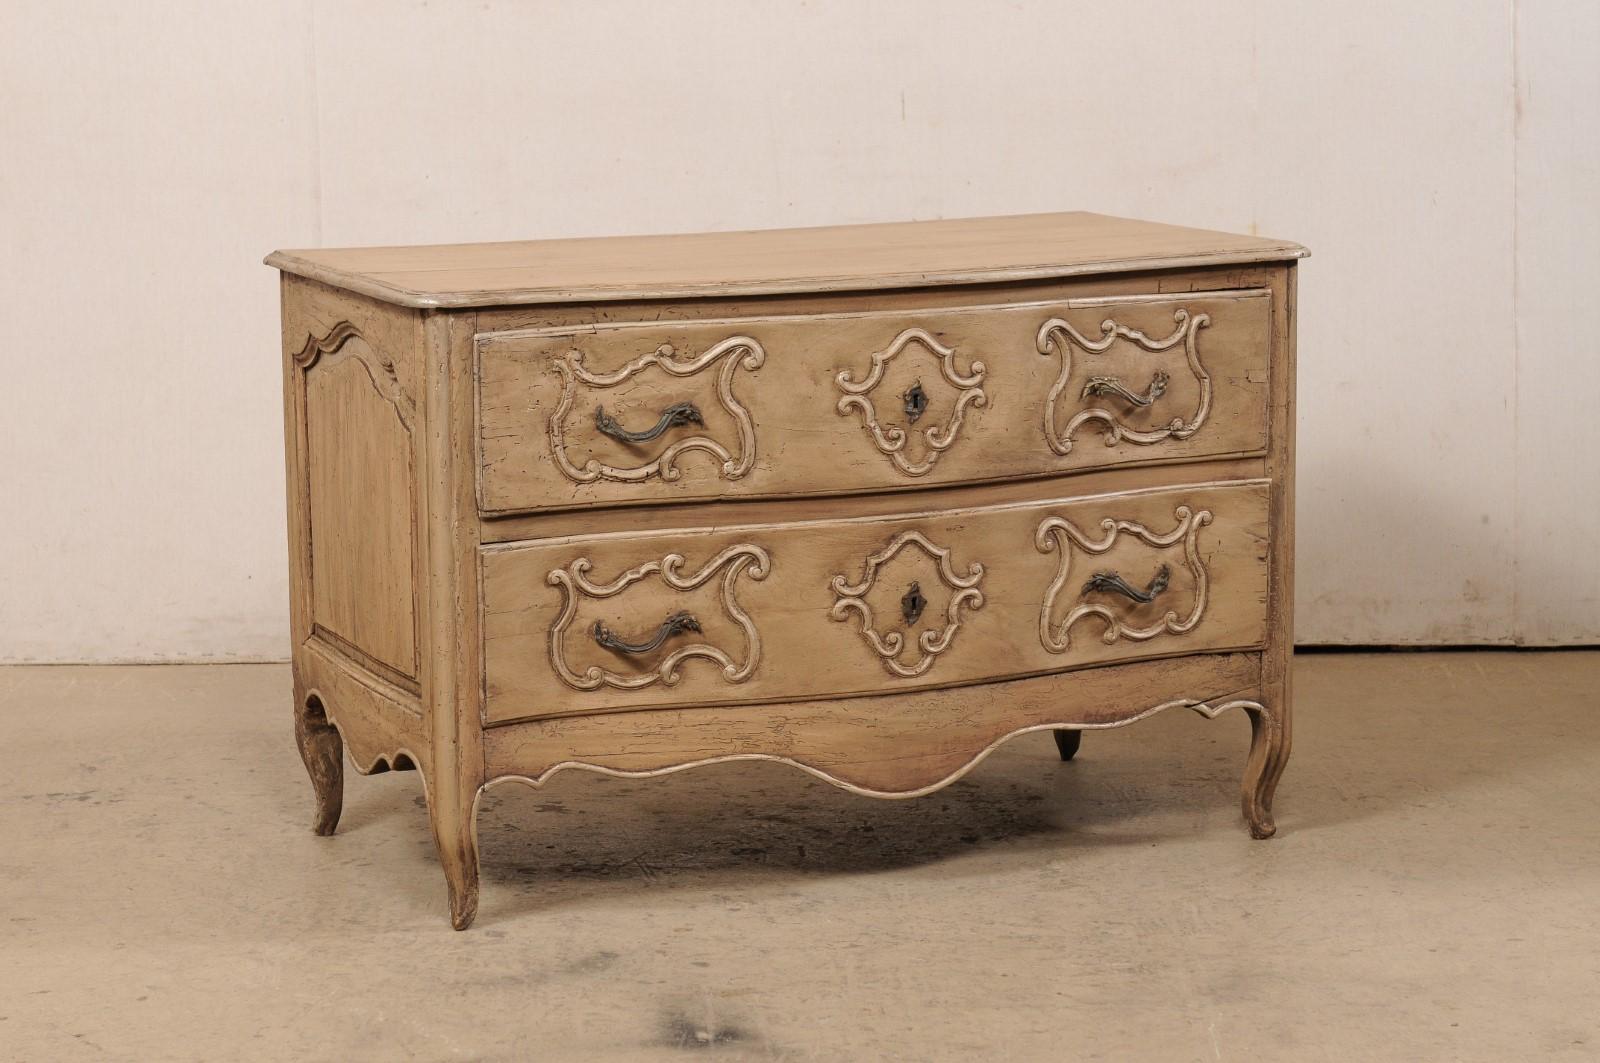 An Italian carved-wood two-drawer chest from the turn of the 18th and 19th century. This antique chest from Italy has been designed with a softly curved, serpentine-shaped body, with skirt carved on three sides, and raised on four petitely-carved